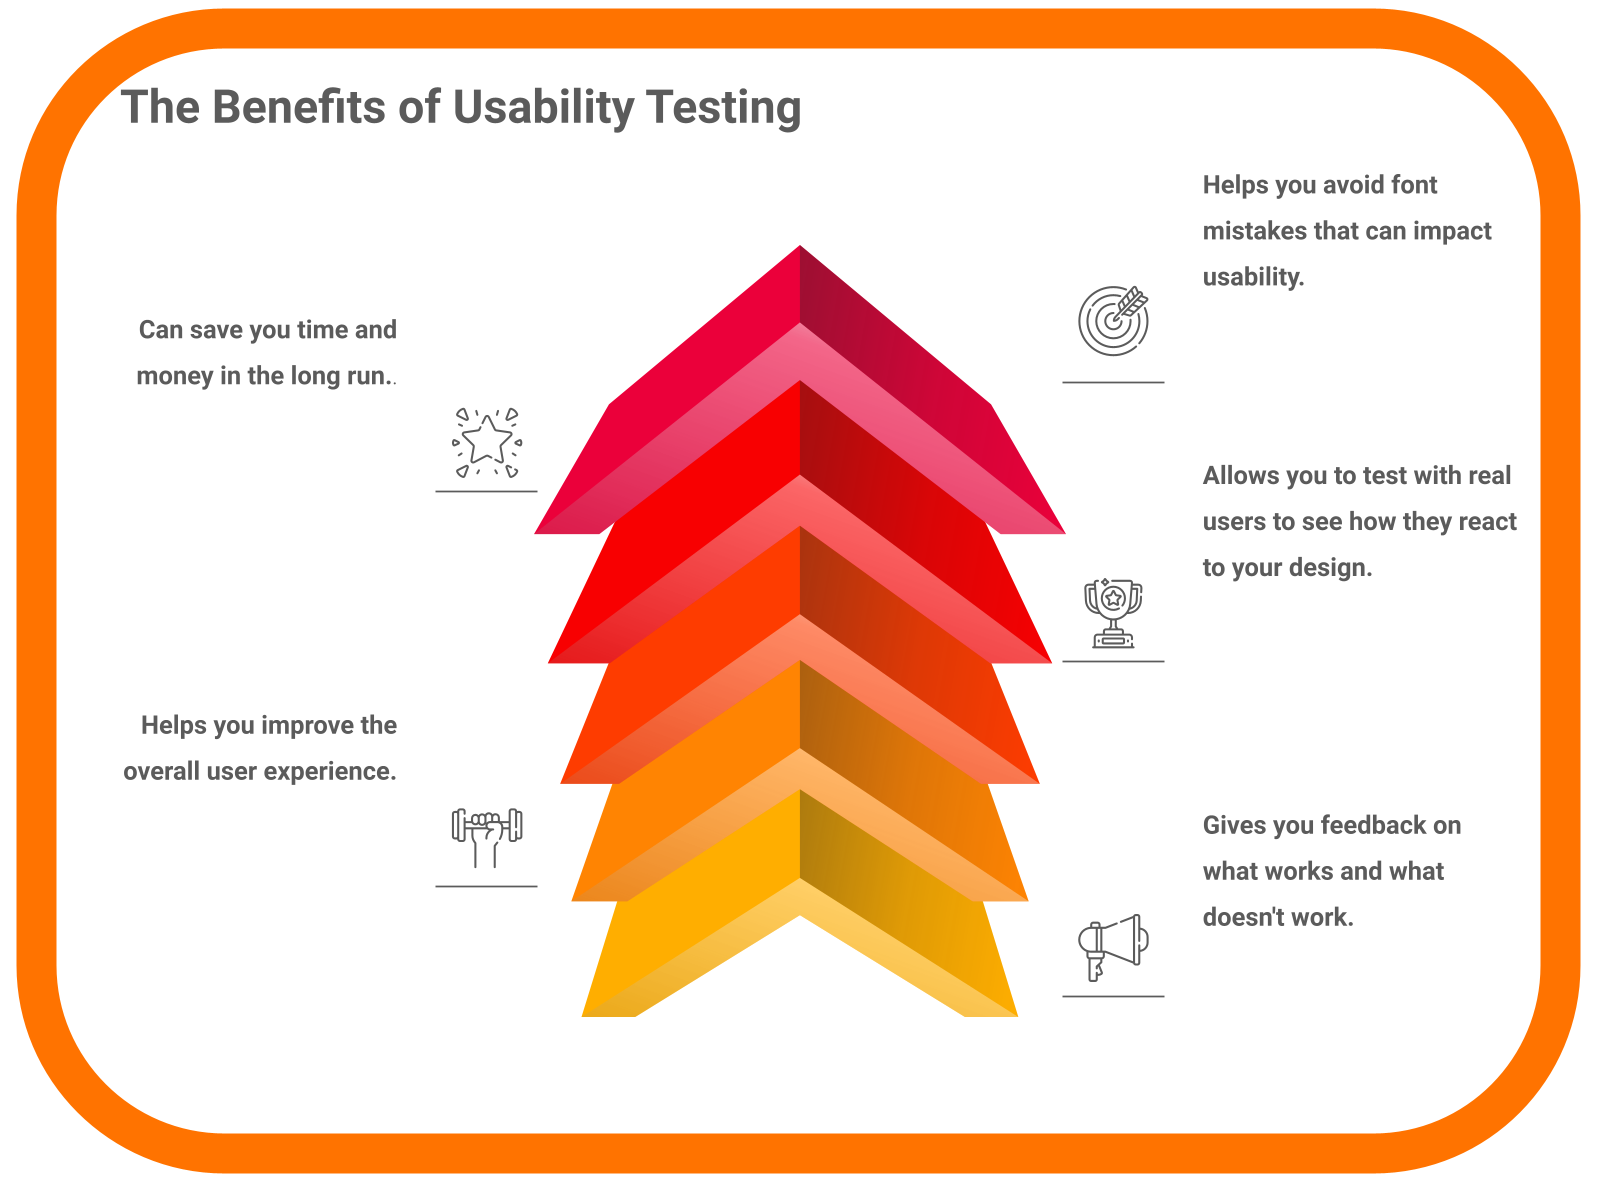 The Benefits of Usability Testing